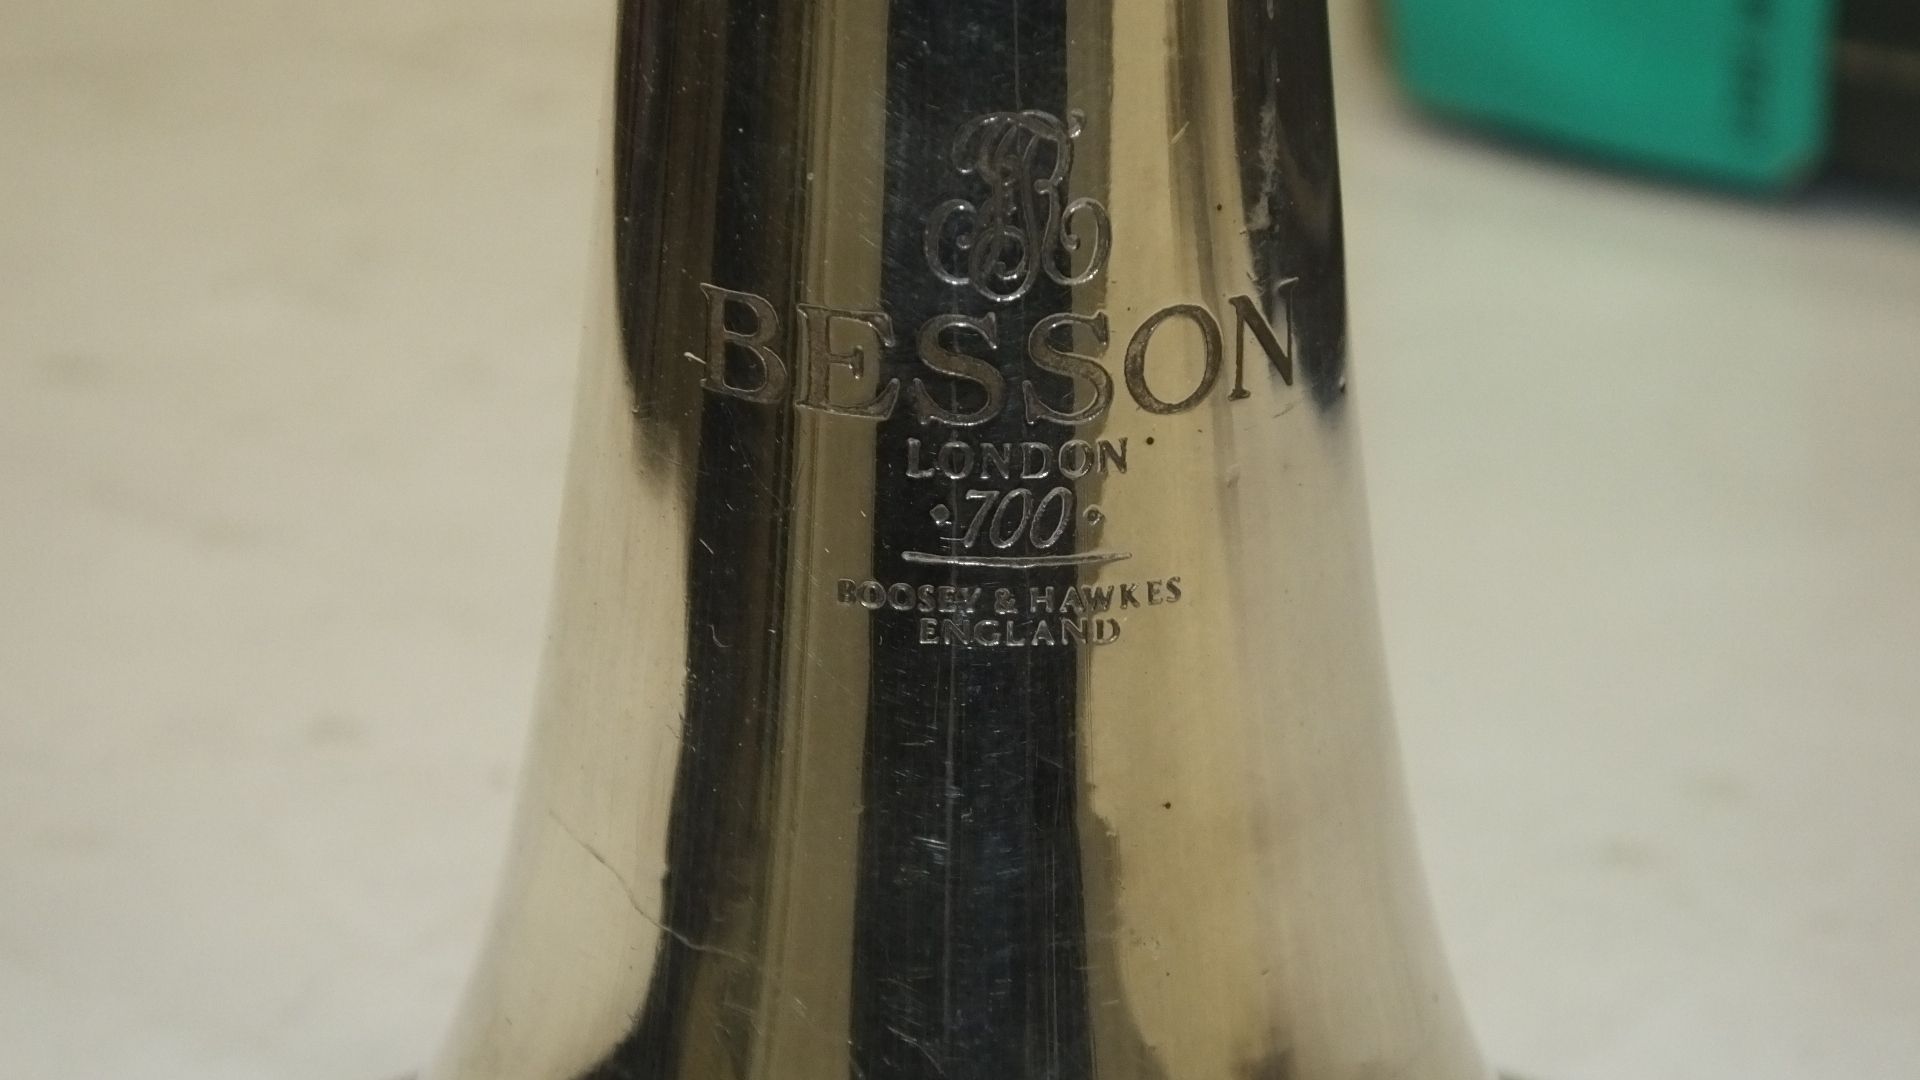 Besson 700 Fanfare Trumpet in case - Serial Number - 706 - 763702 - Image 5 of 10